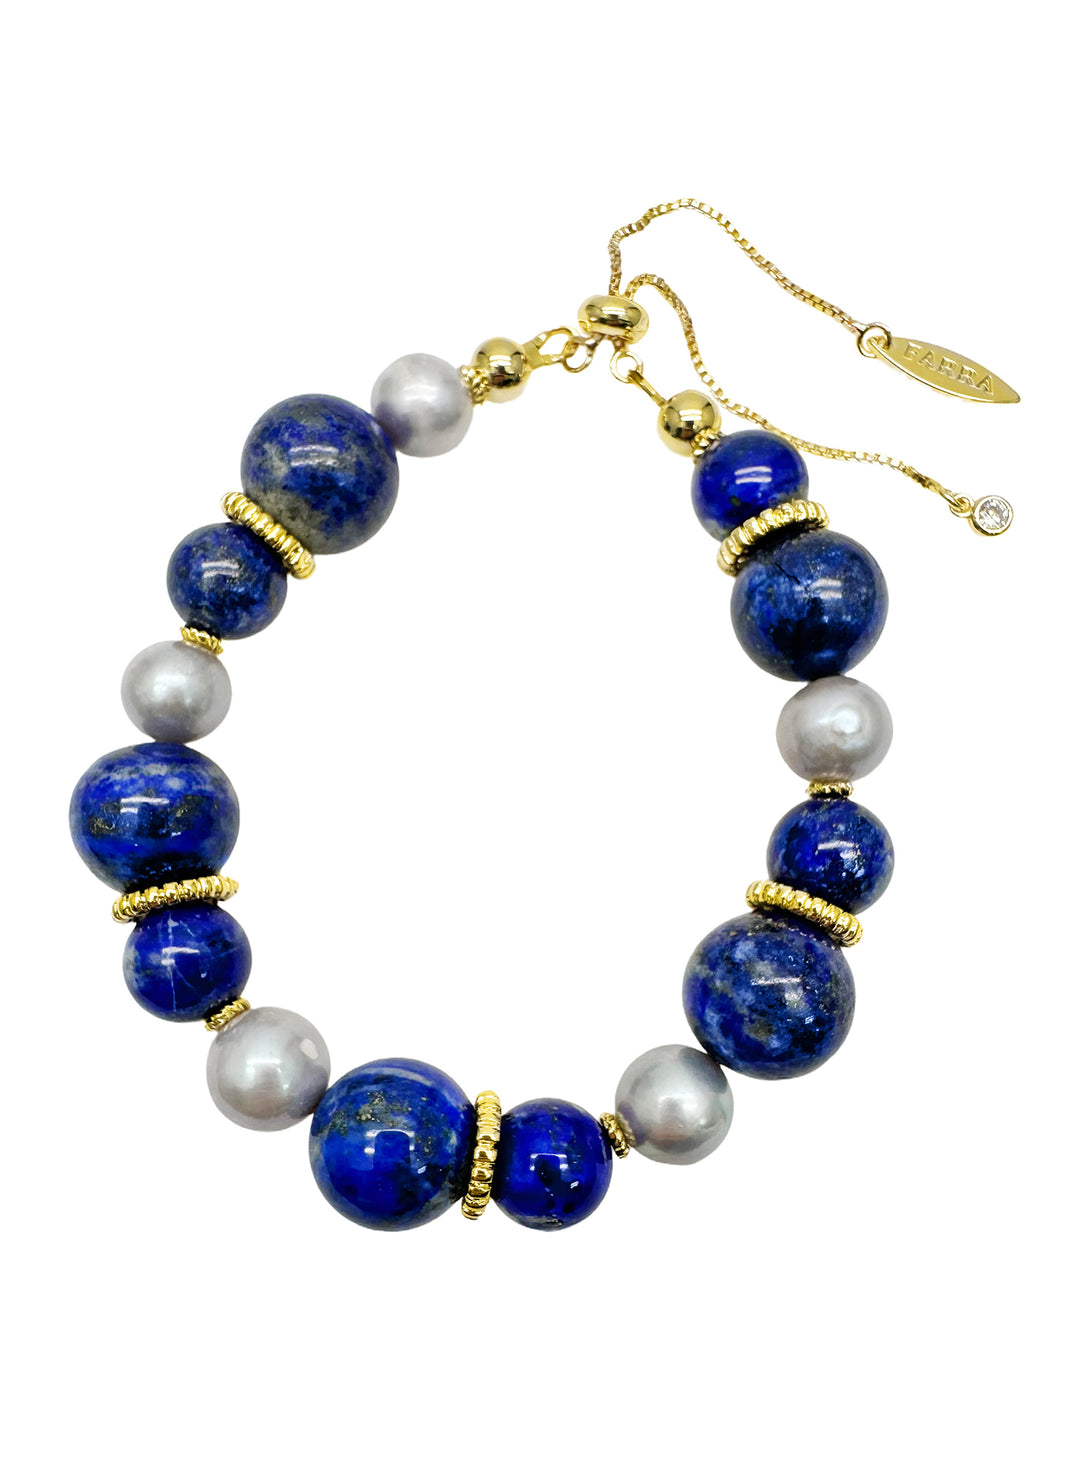 Nugget Blue Lapis with Gray Freshwater Pearls Adjustable Bracelet LB011 - FARRA